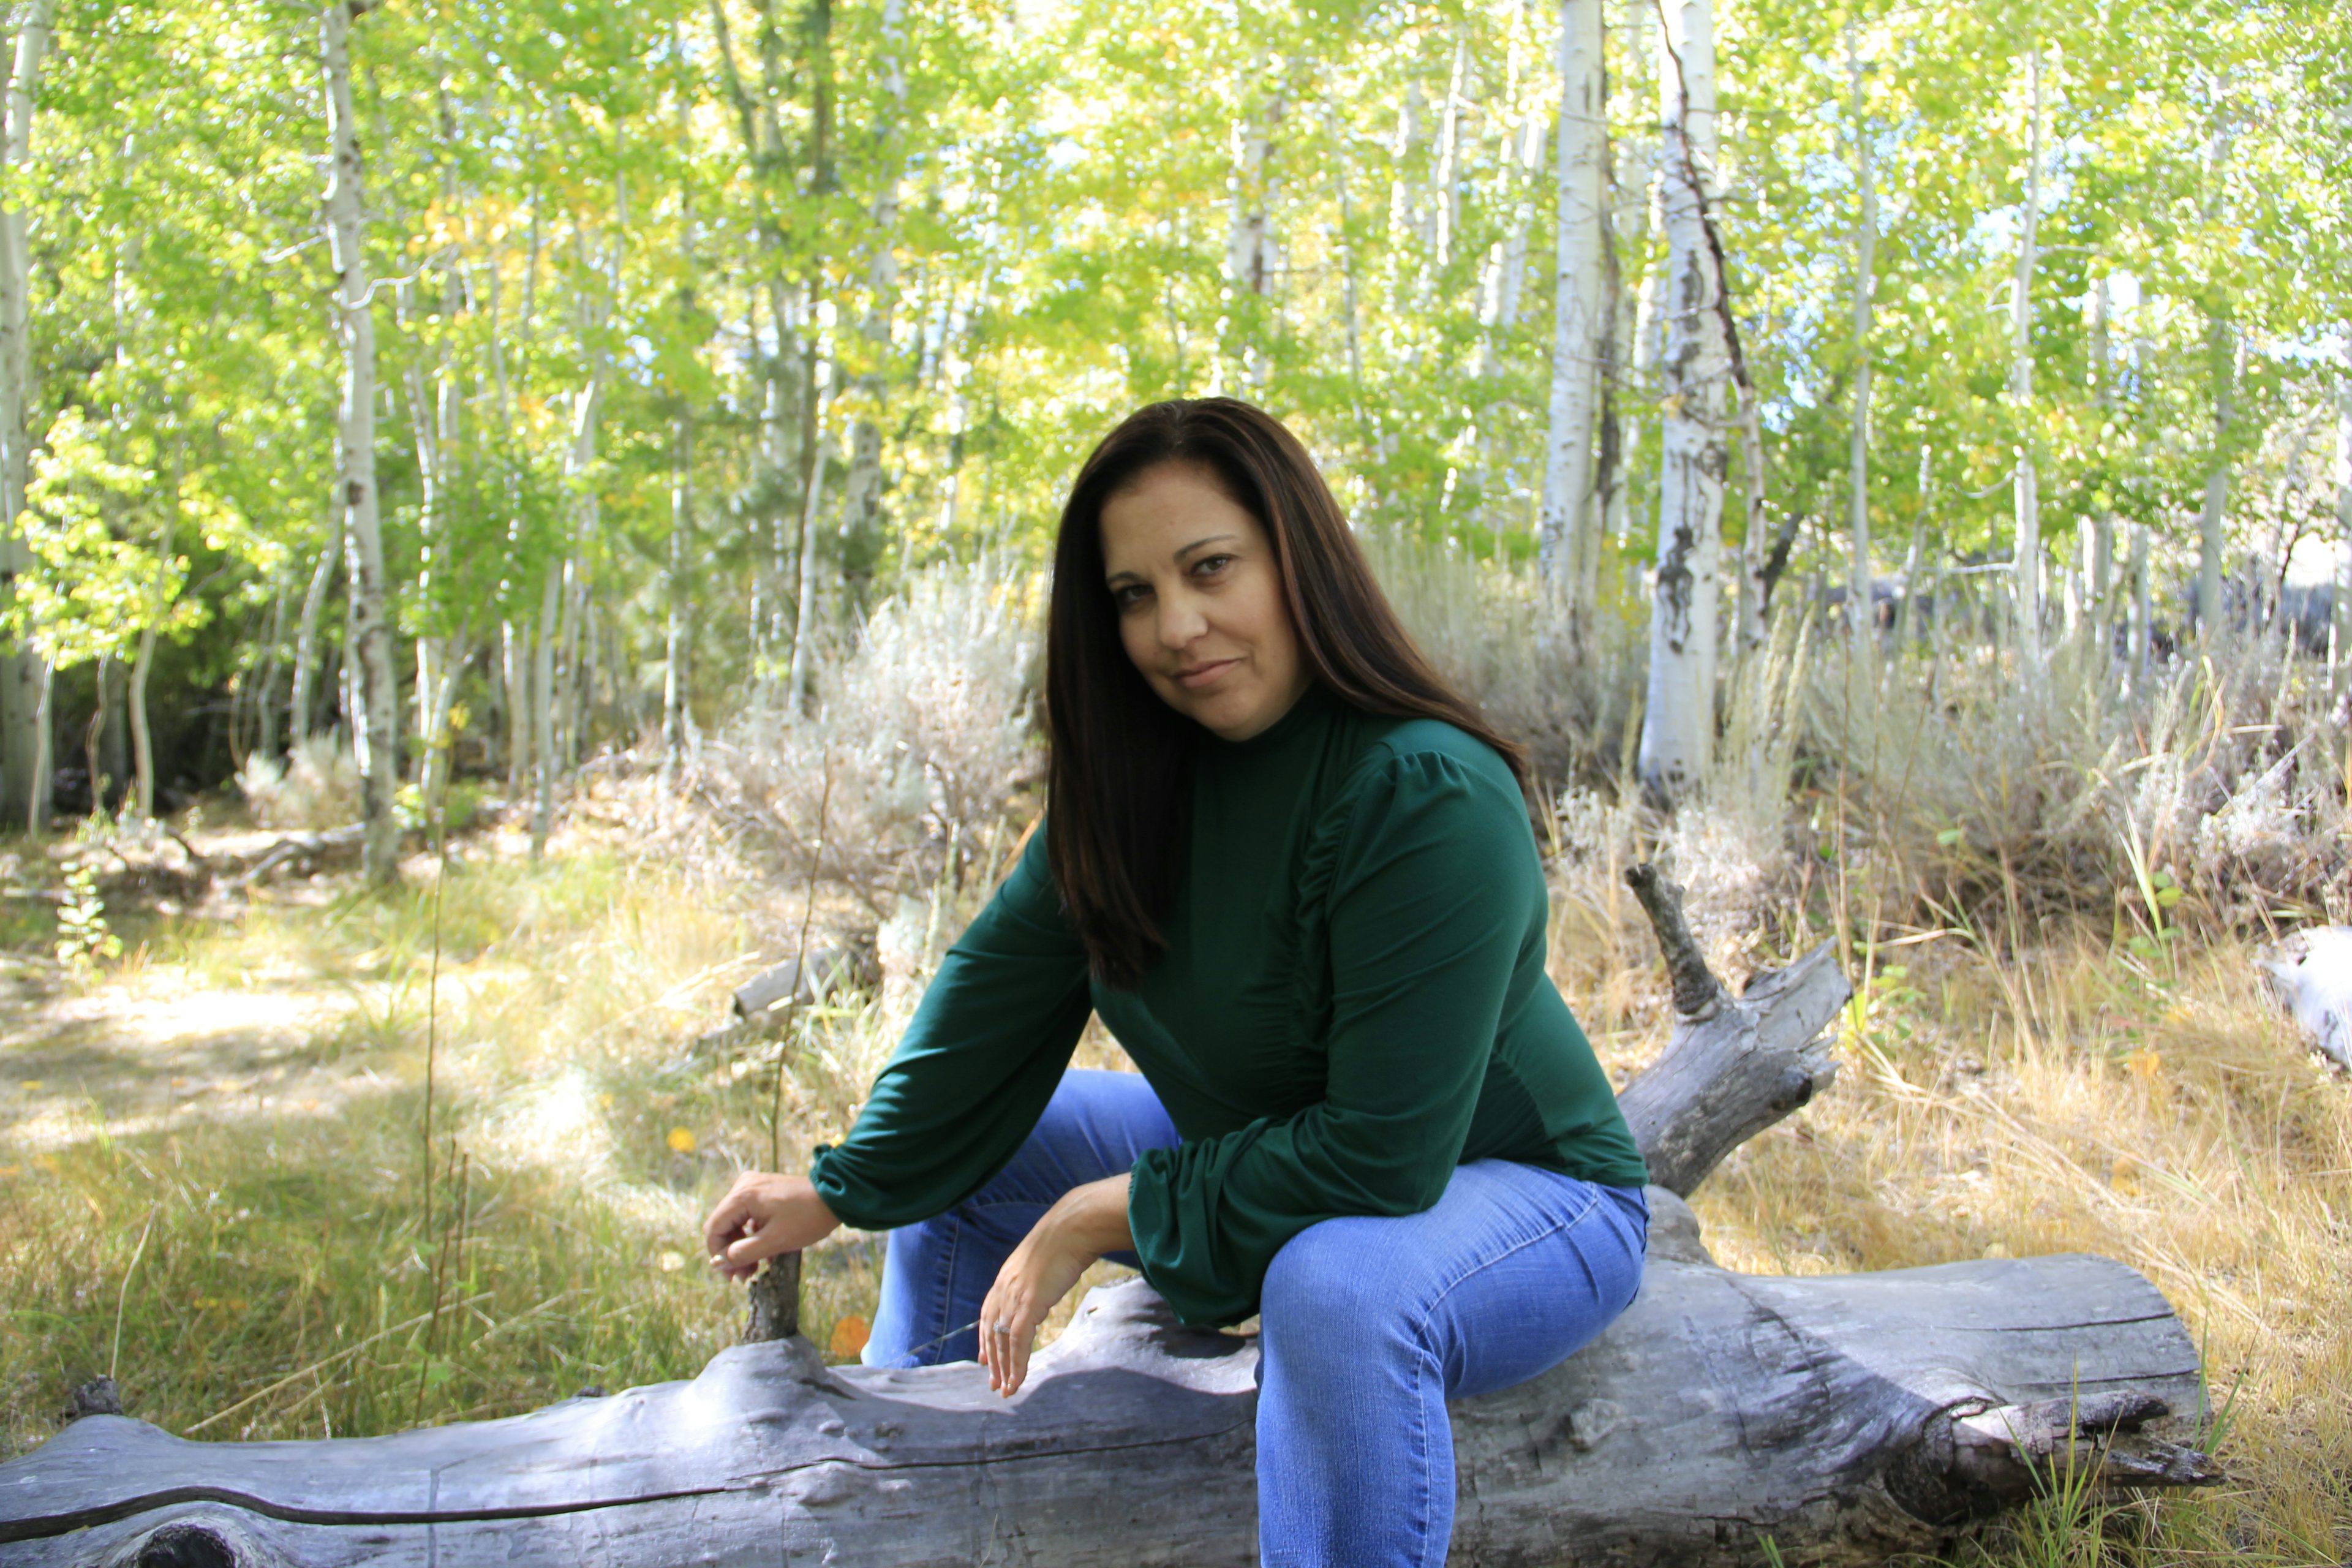 Travel advisor Alena Grace Saporsky in a green shirt in the forest.